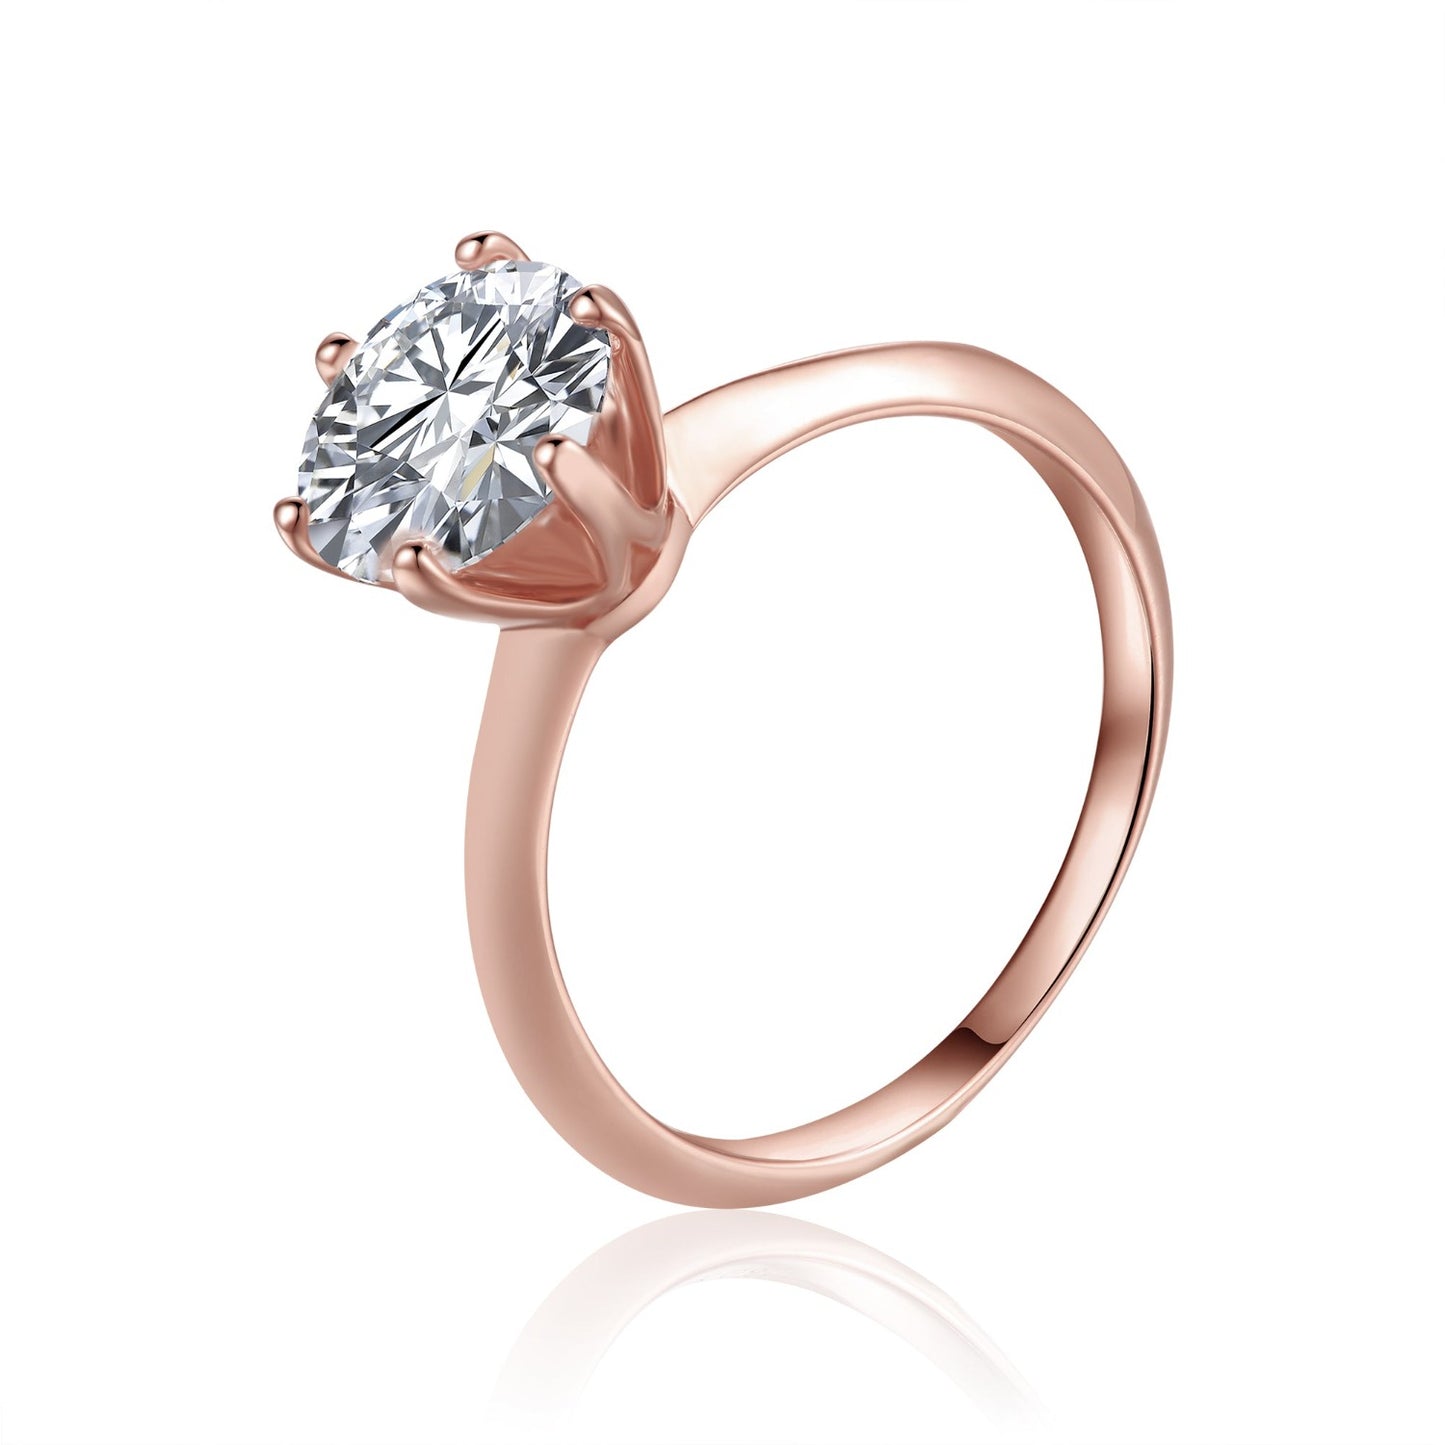 Solitaire Tiffany 6 Claw Setting 2.00ct Moissanite Engagement Ring Set in 9ct Rose Gold